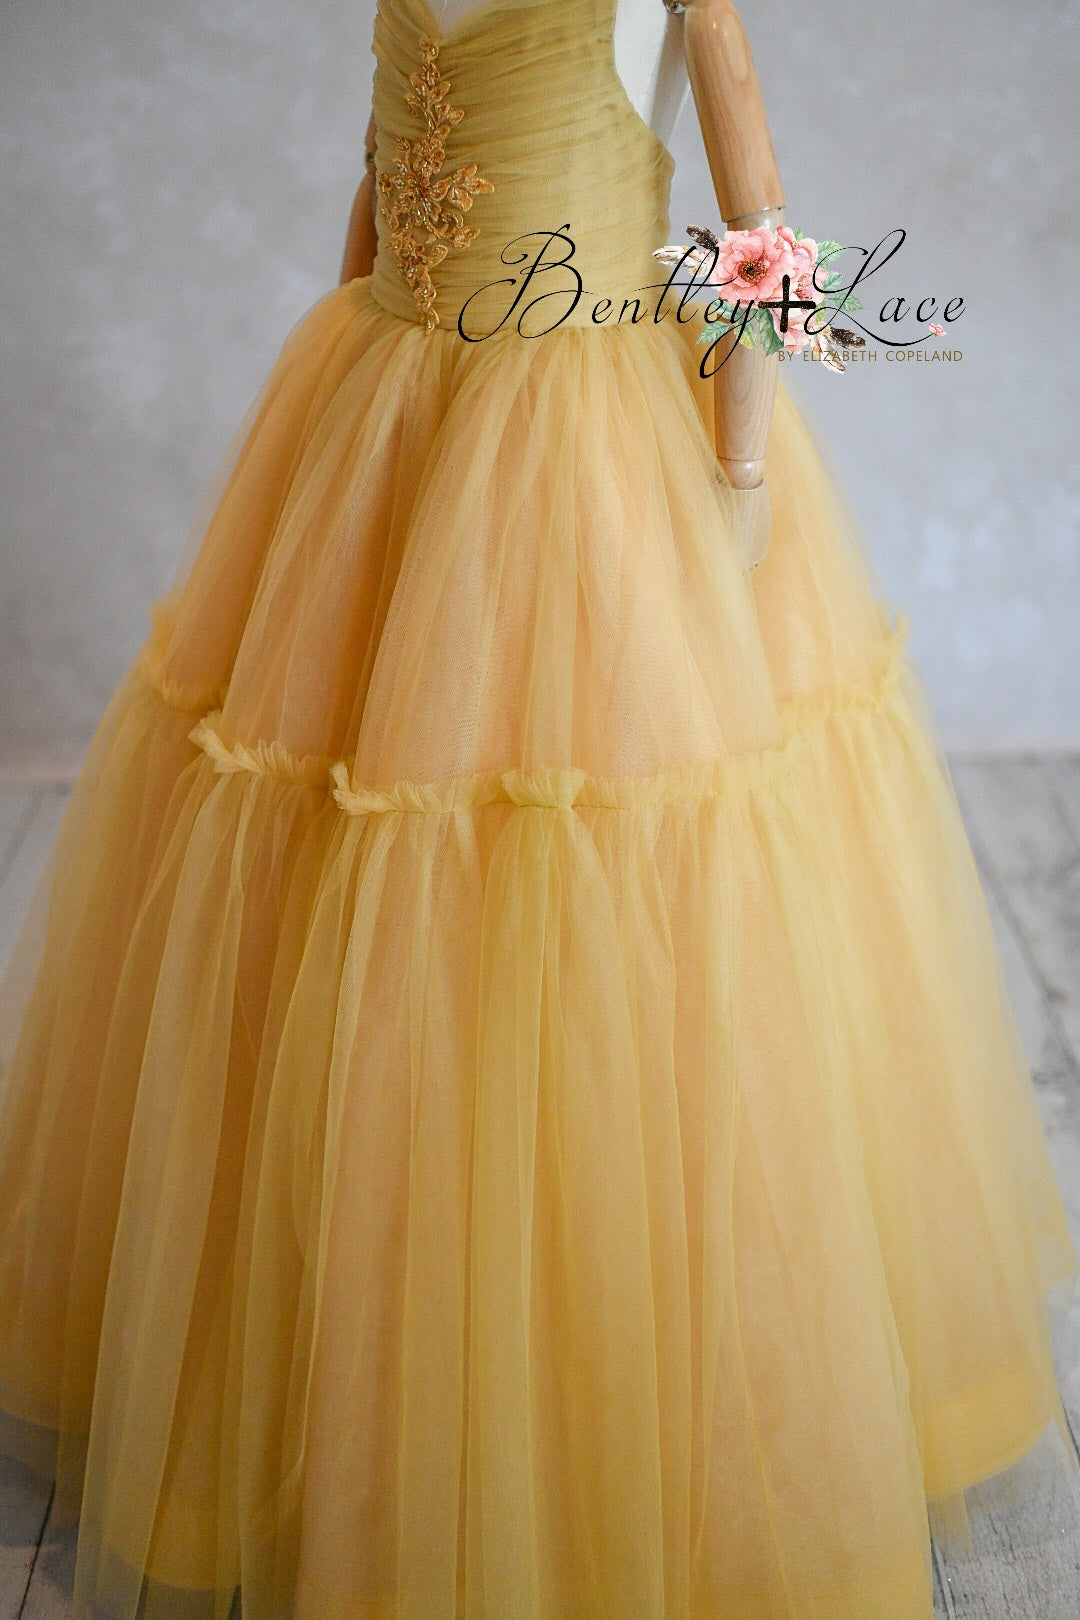 Hillary/Frenchie Solid gown- no applique choose color Editorial Dress, Couture Gown, Special Occasion Dress